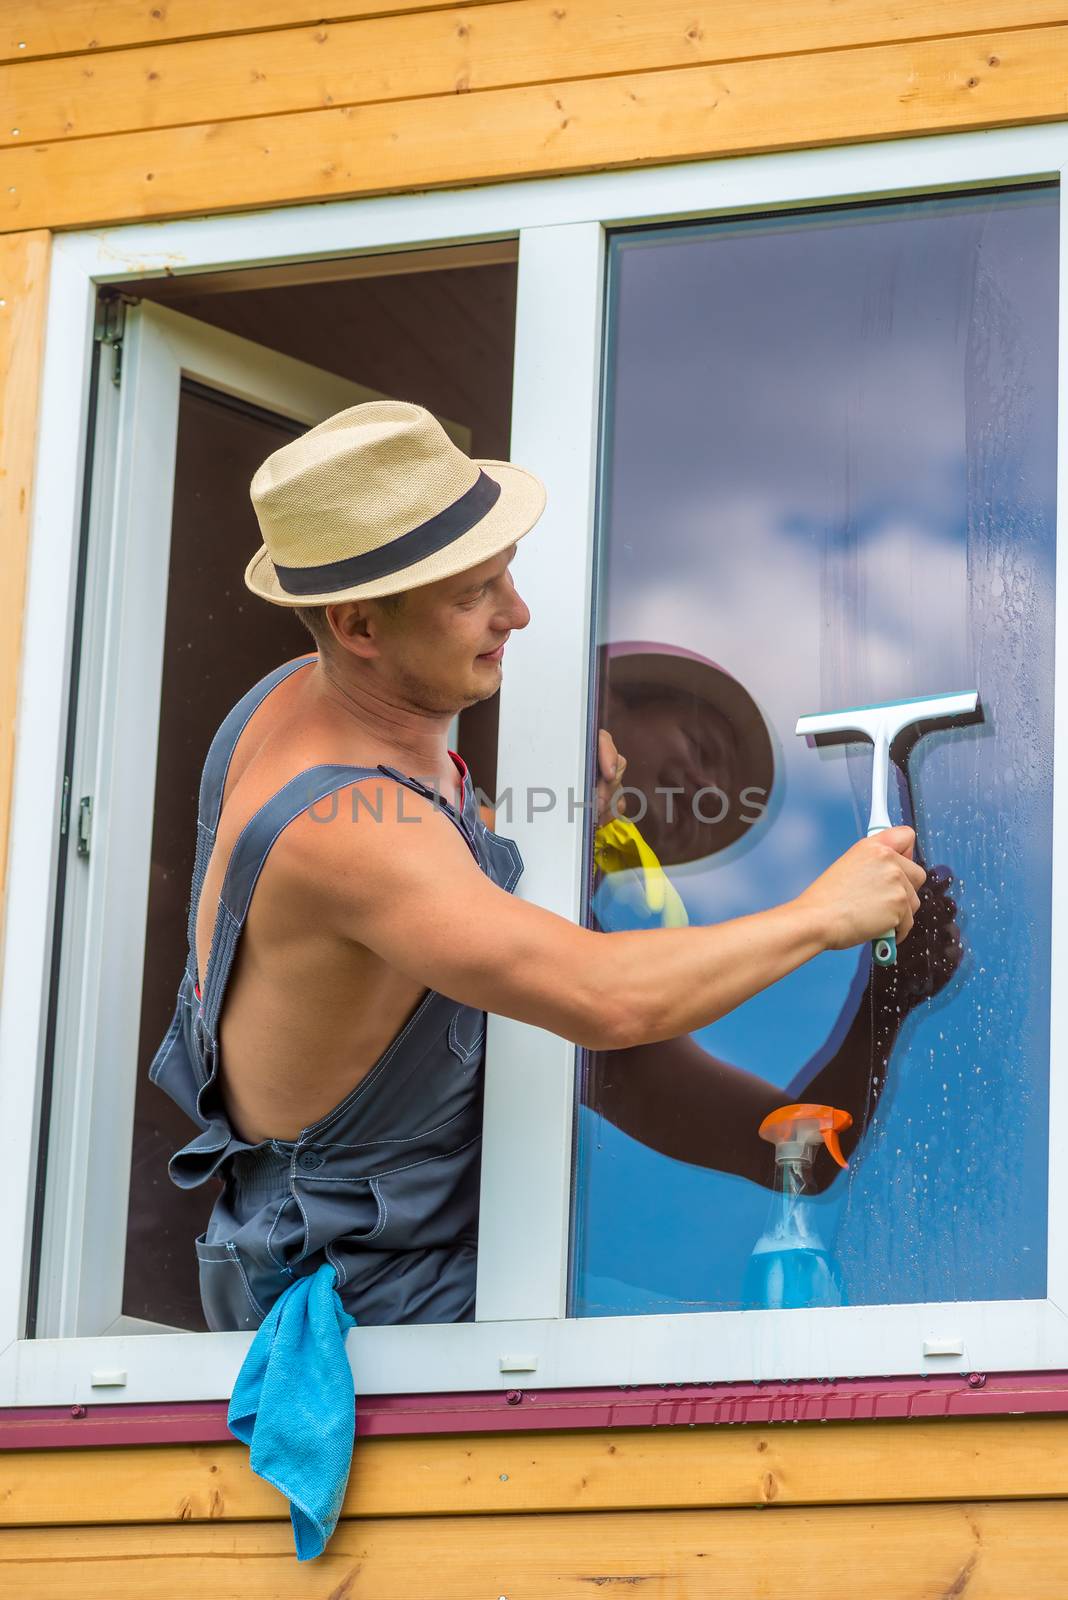 A window cleaner during work, cleaning the glass